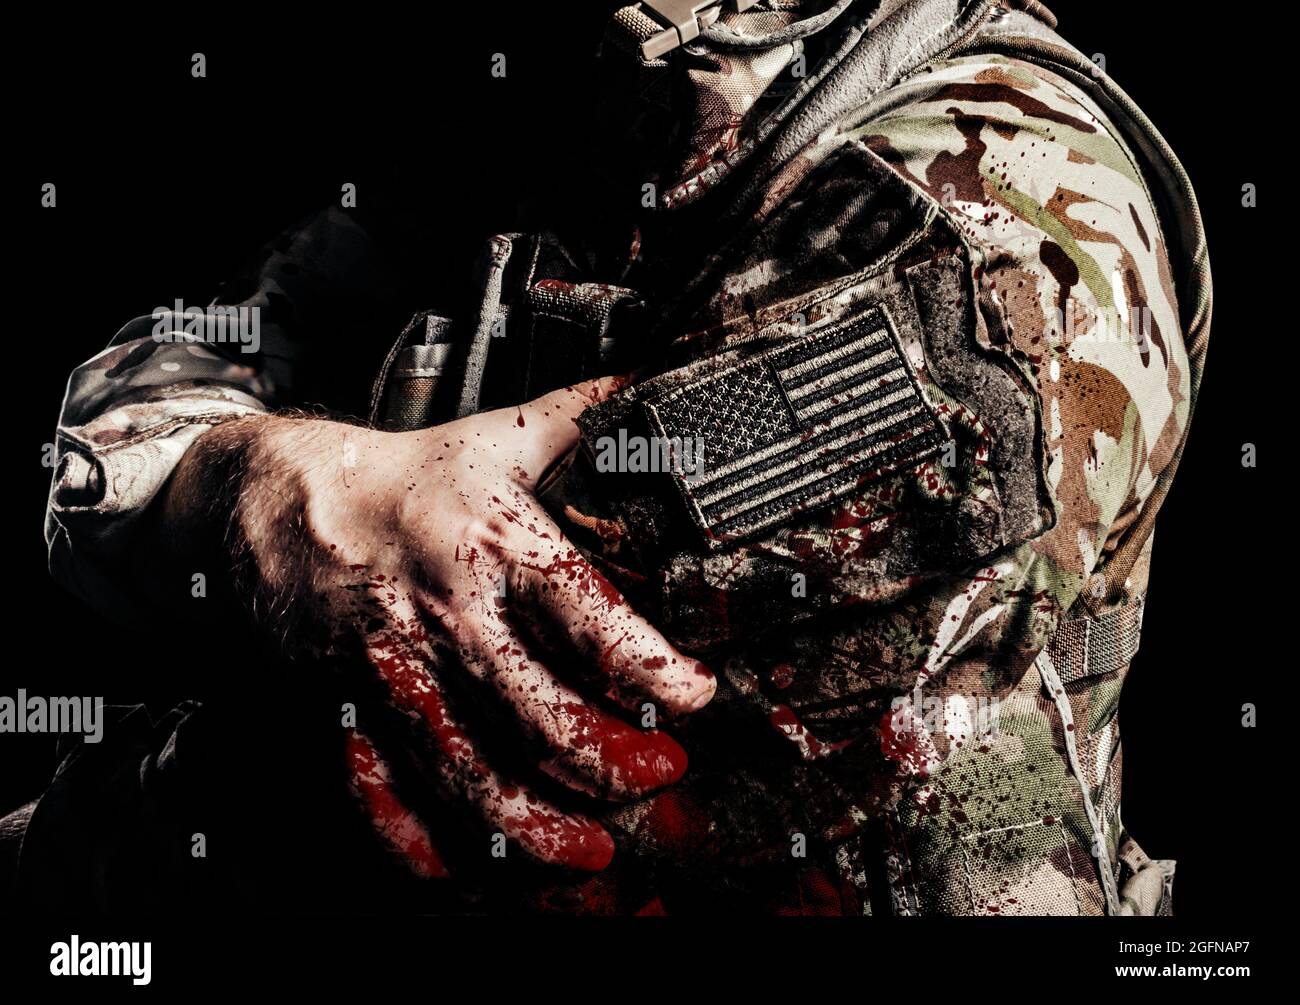 Photo shaded and wounded american soldier in uniform with usa patch on arm and blood splatter on it. Stock Photo